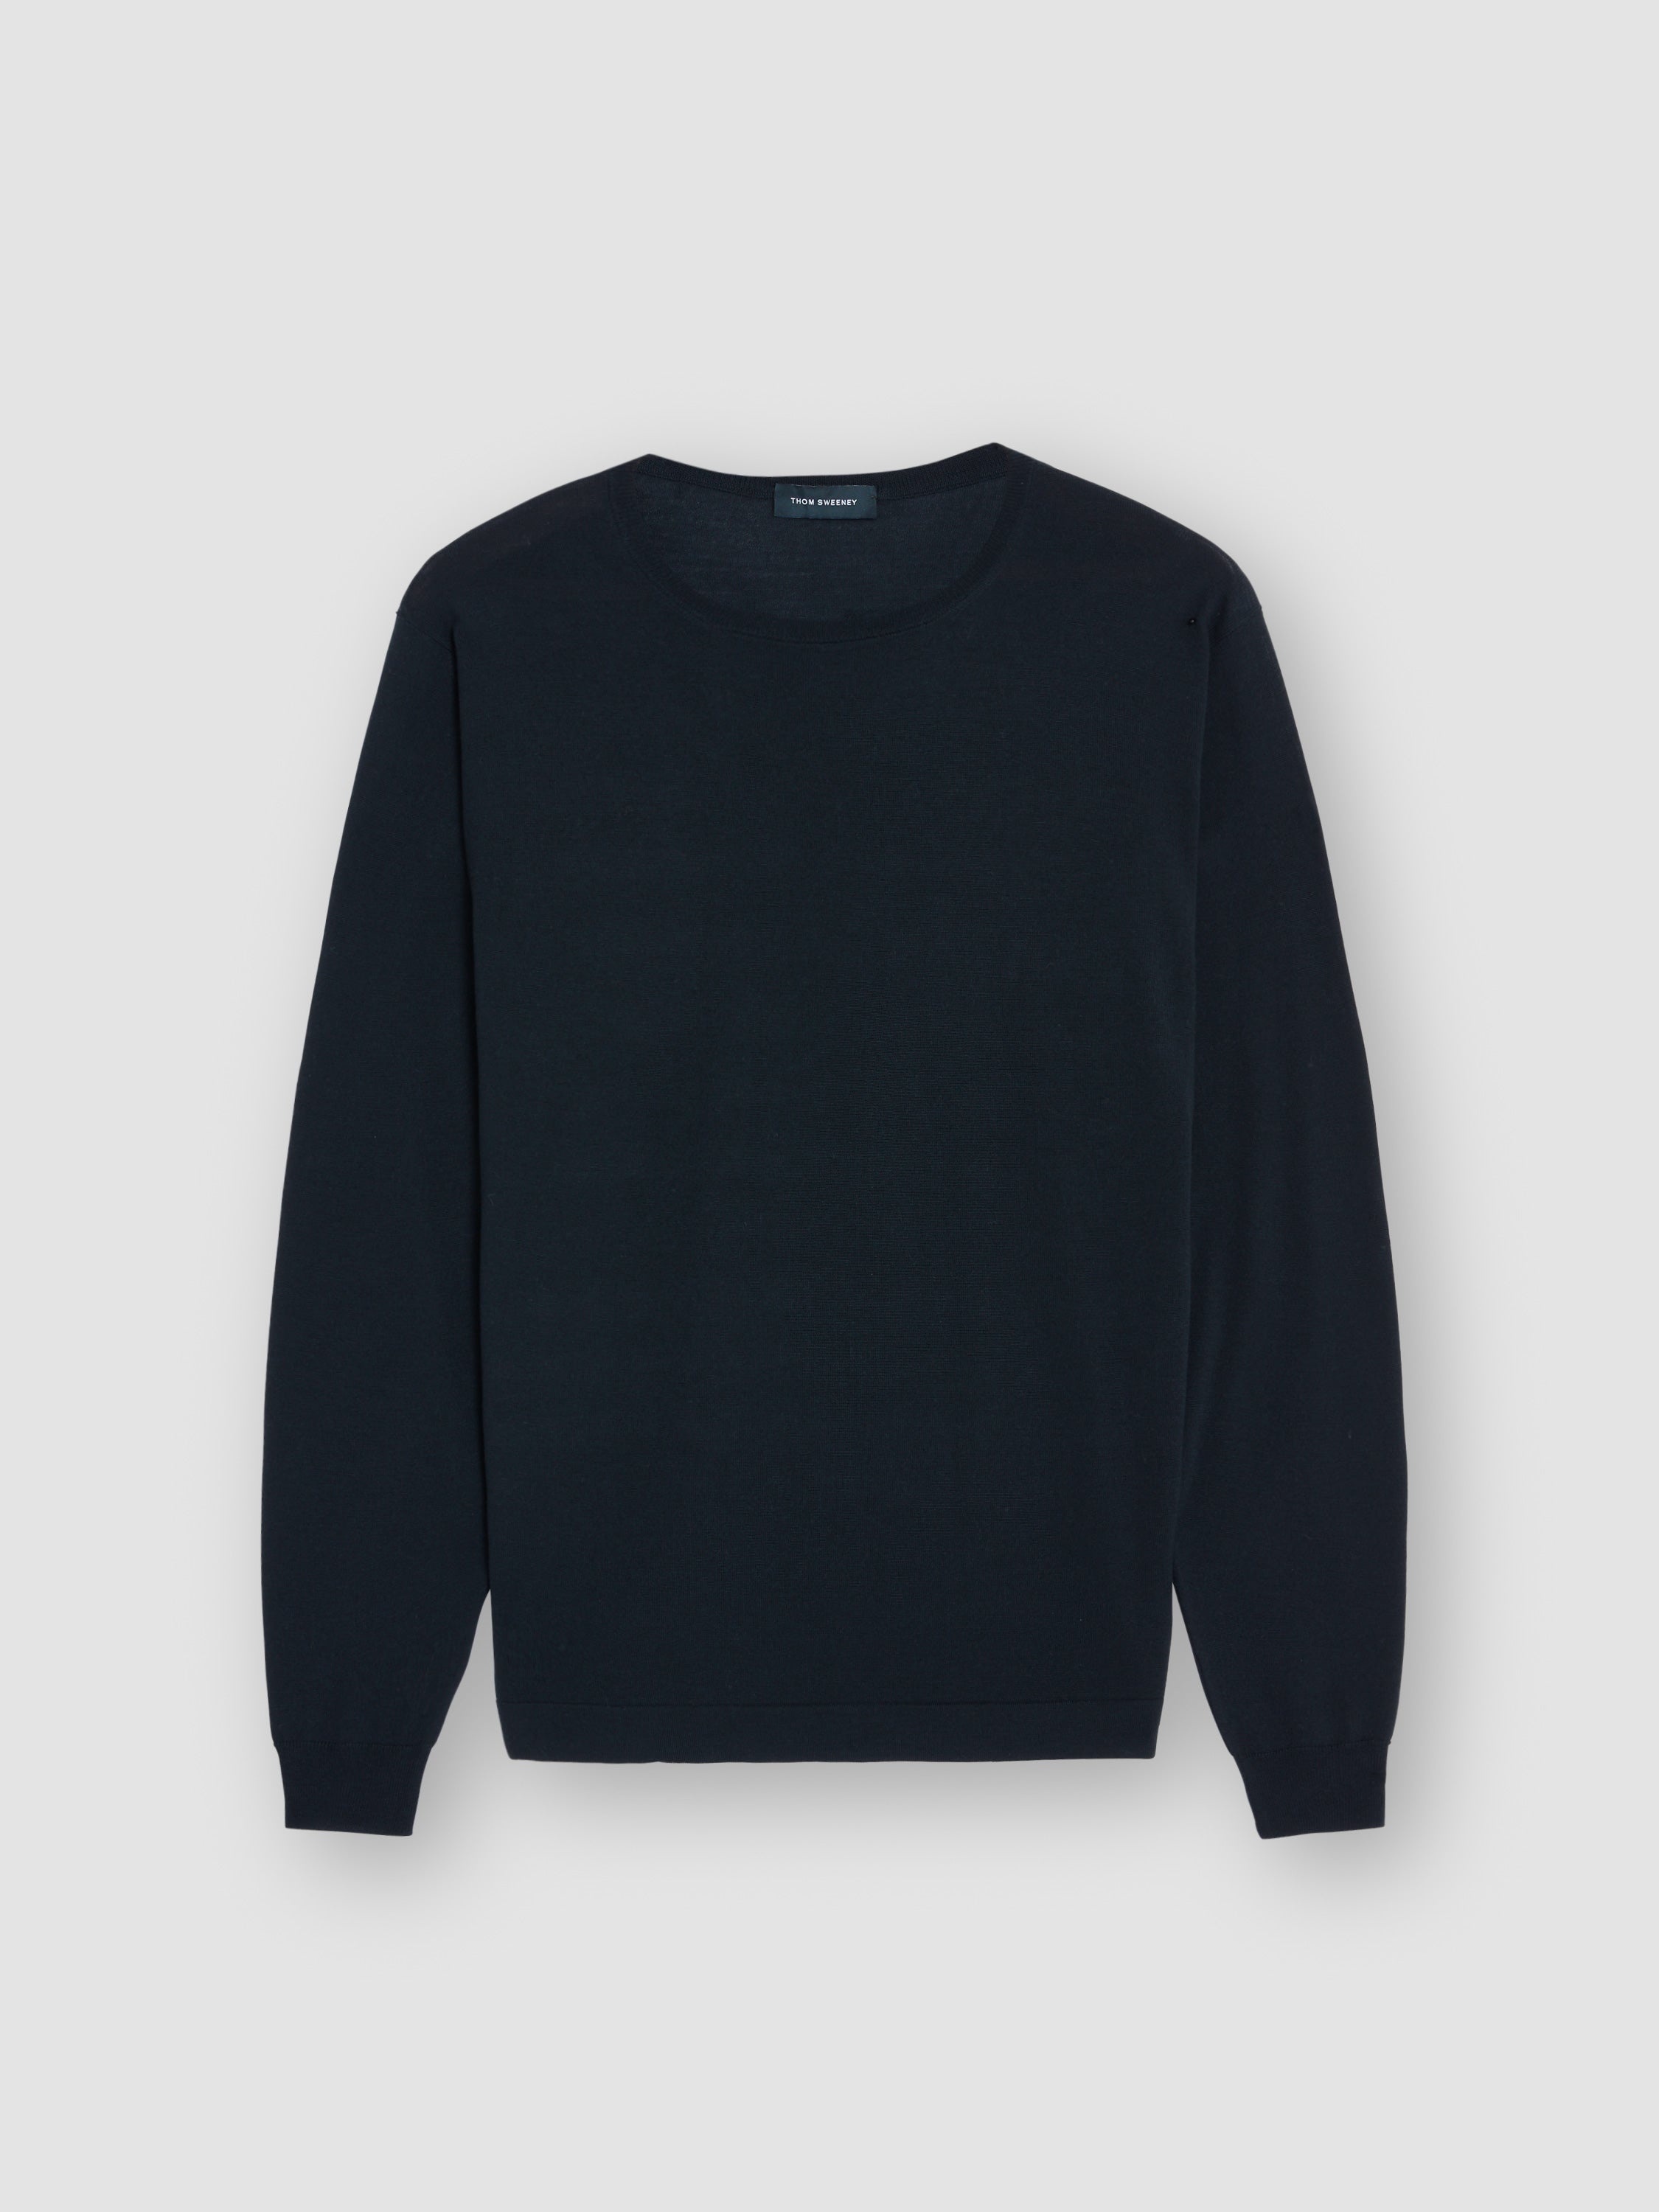 Merino Wool Extrafine Crew Neck Sweater Forest Green Product Image